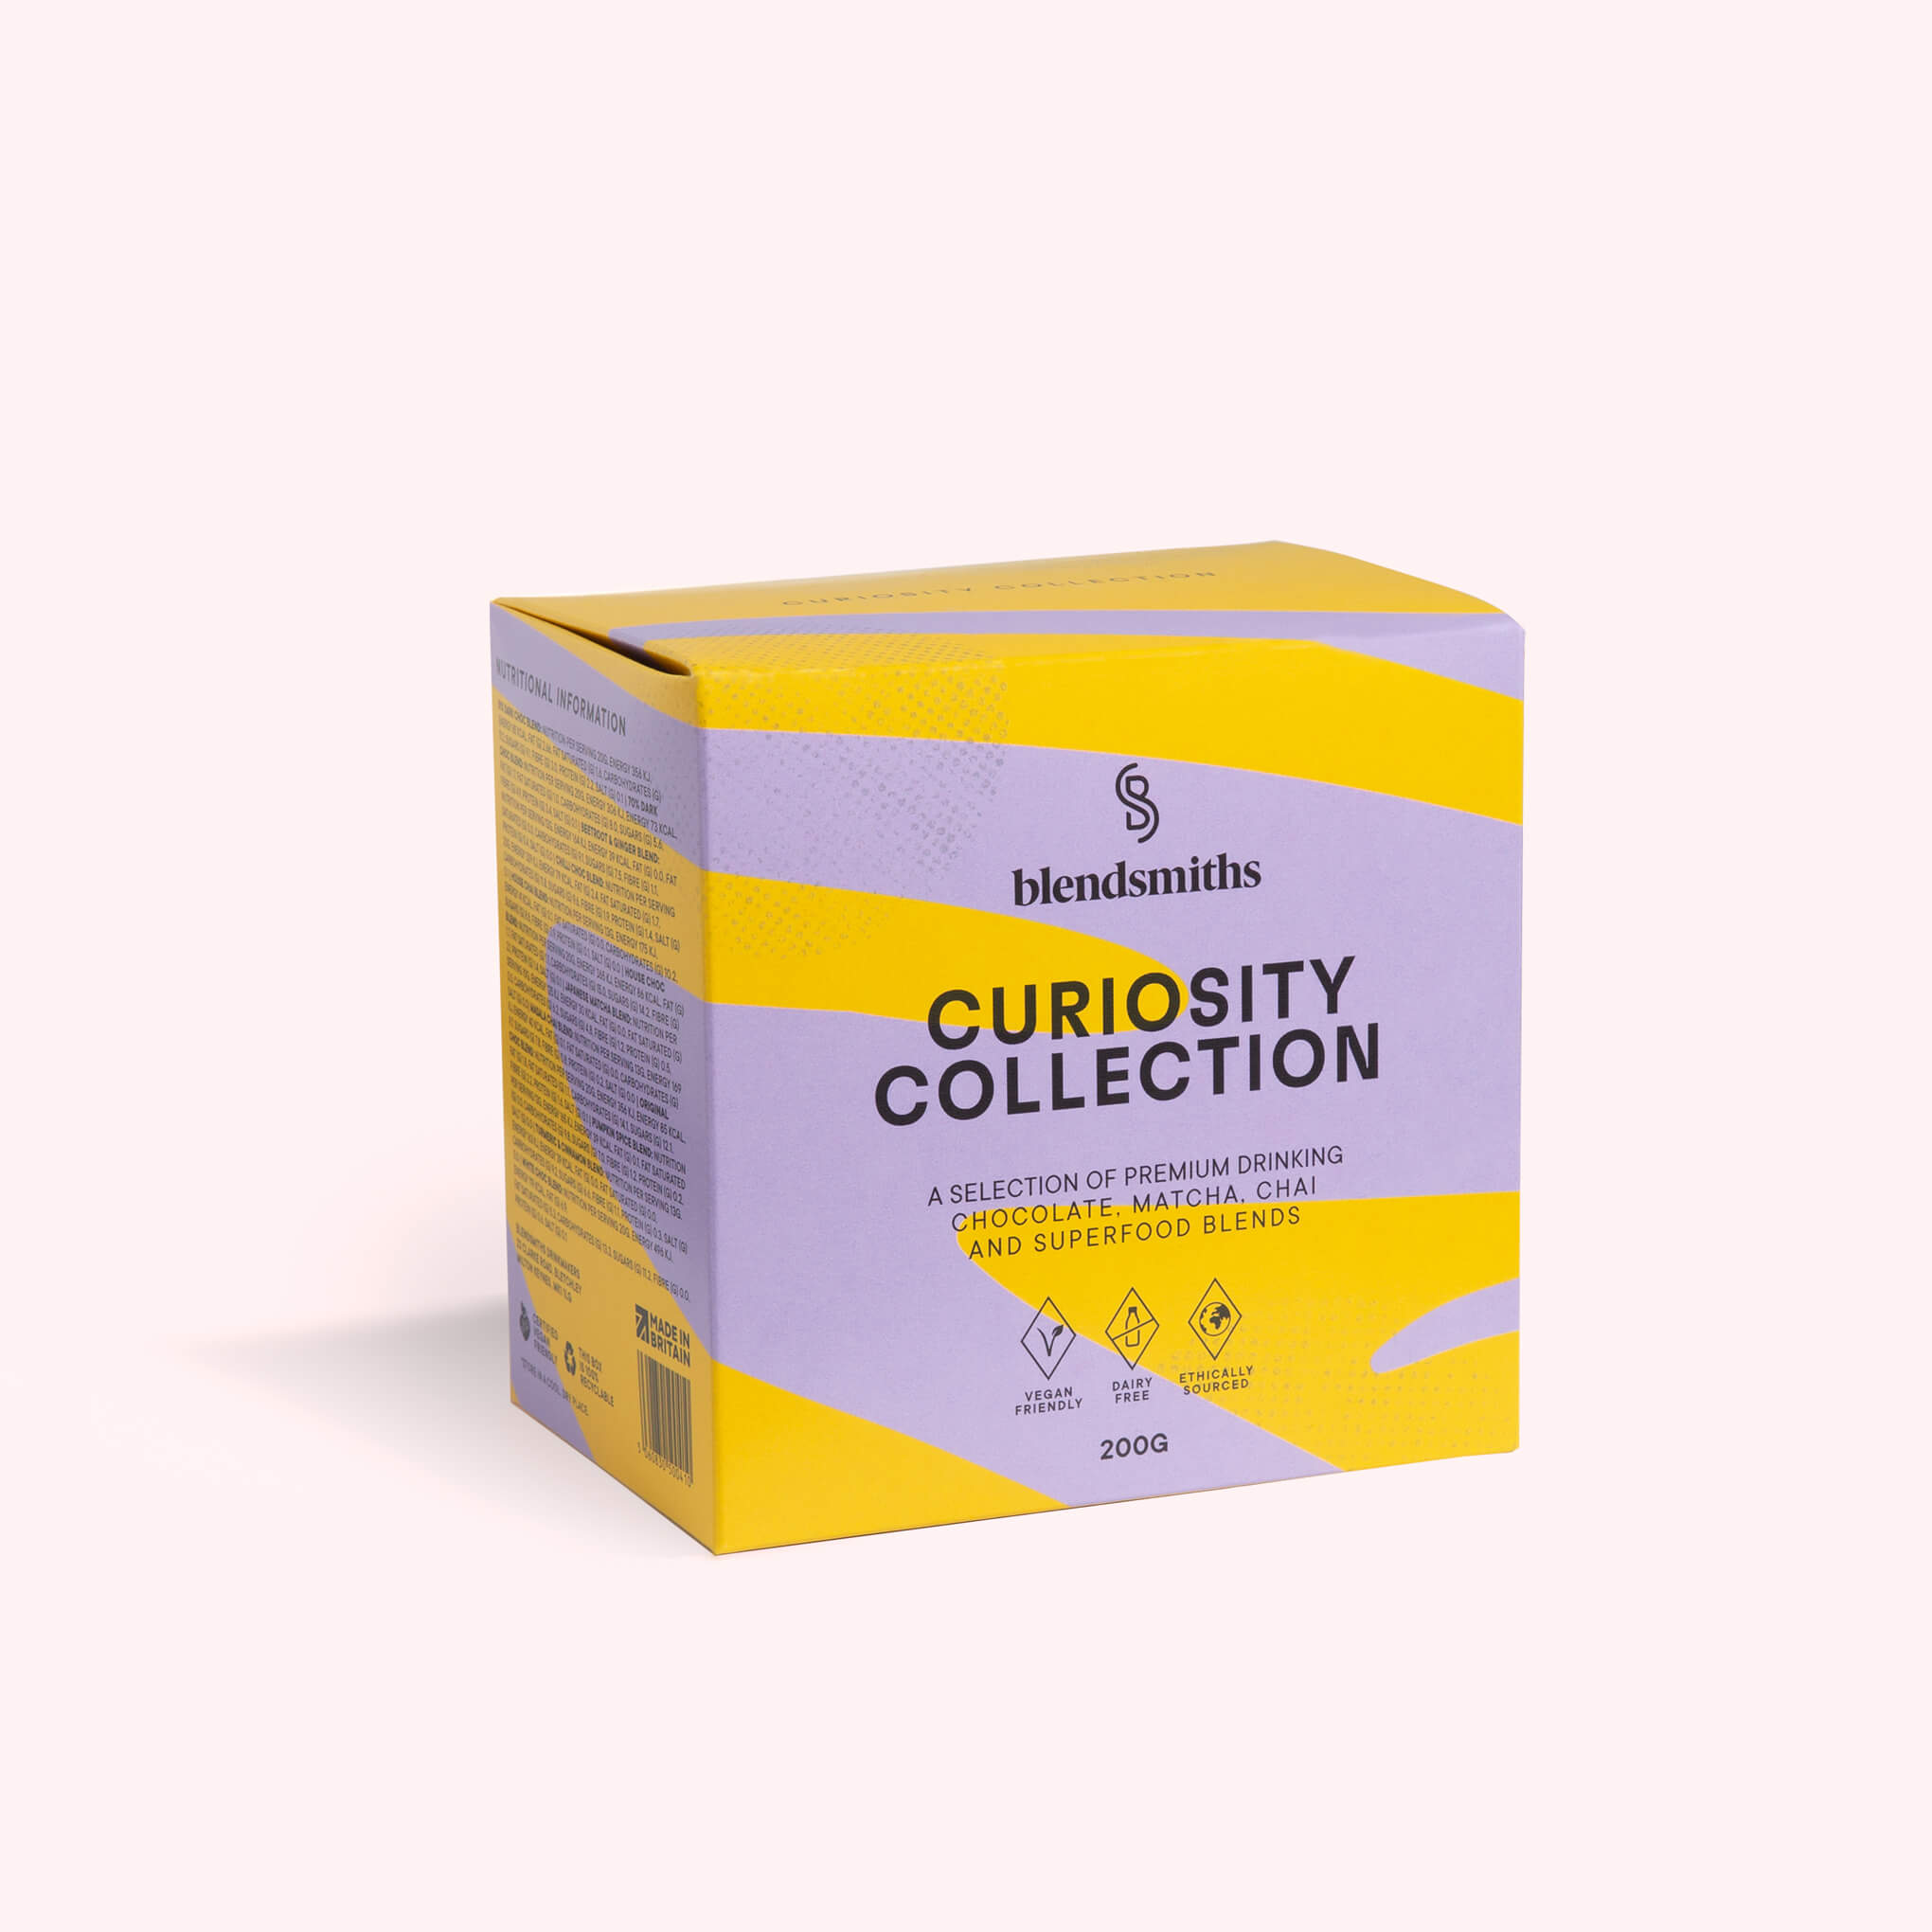 Curiousity Collection Box